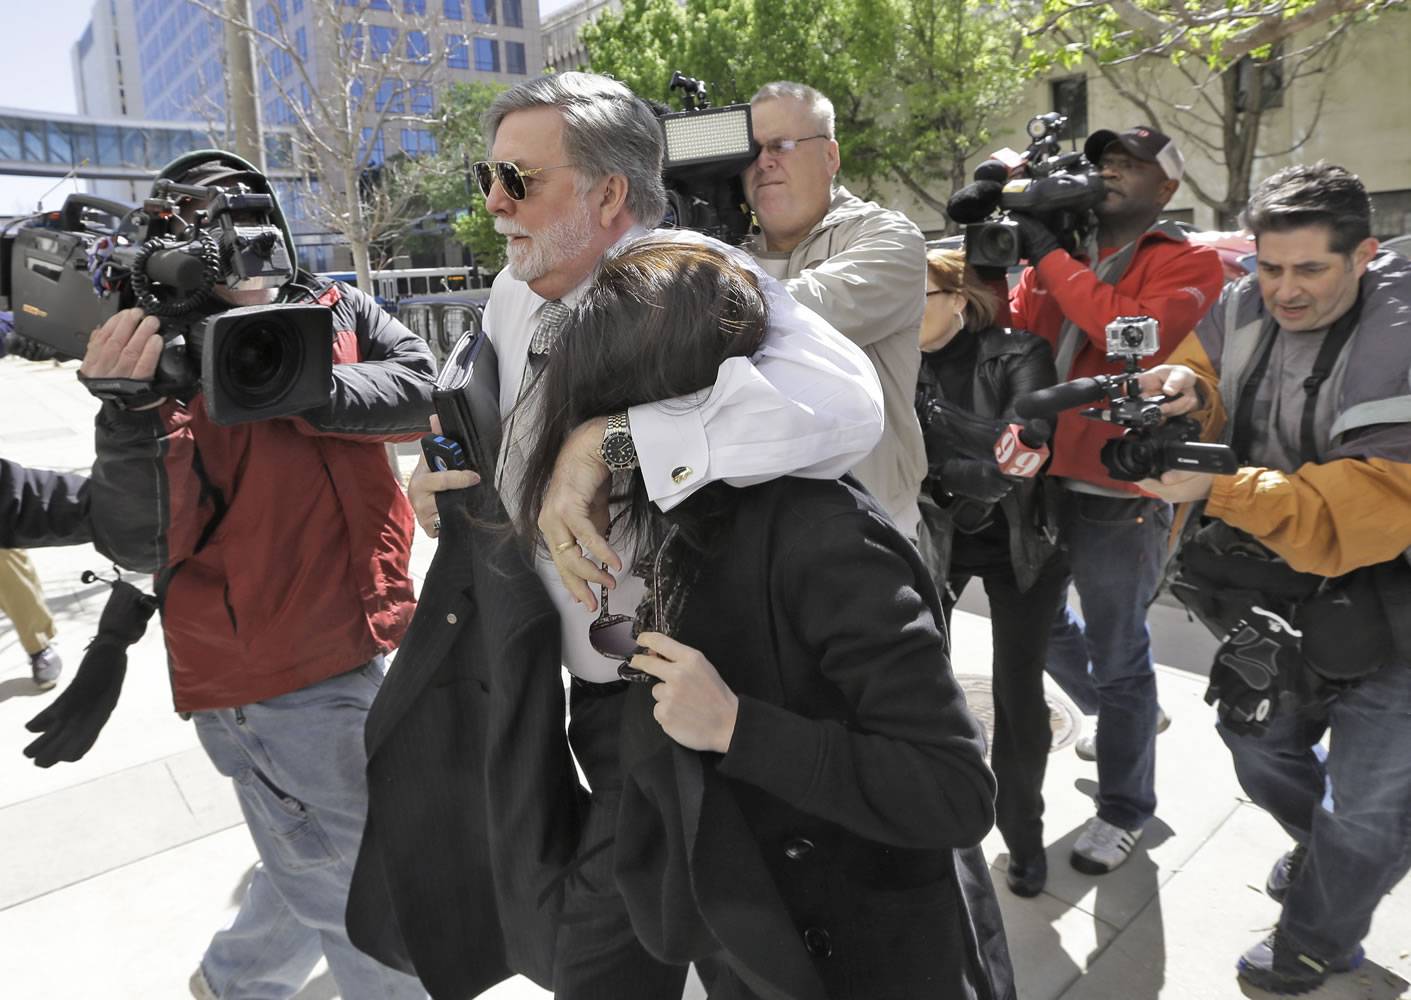 Casey Anthony is protected from the media by her attorney, Cheney Mason, as she arrives at the United States Courthouse for a bankruptcy hearing Monday in Tampa, Fla.